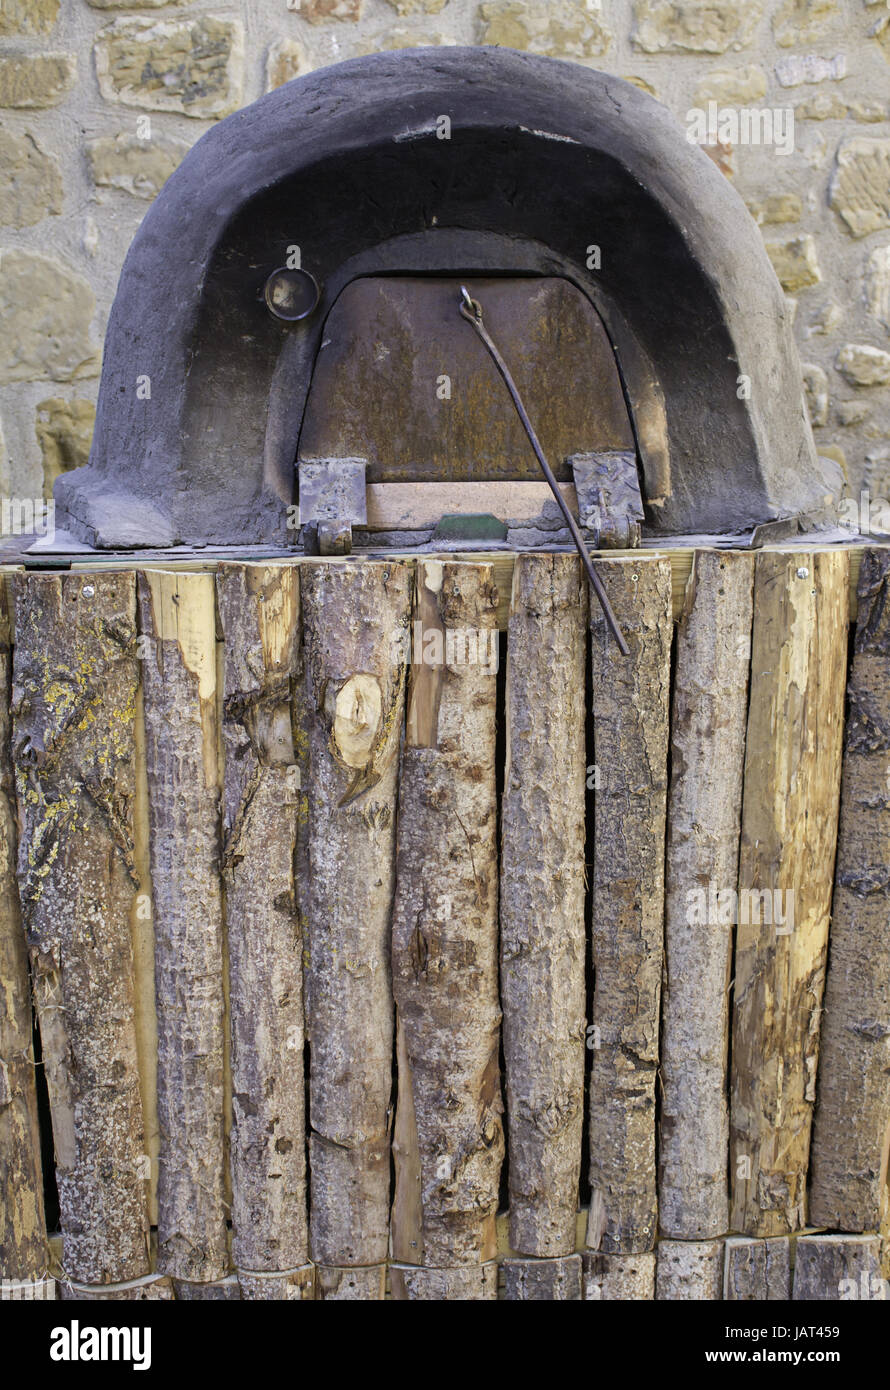 Metal and wood oven medieval and ancient history and real estate Stock Photo